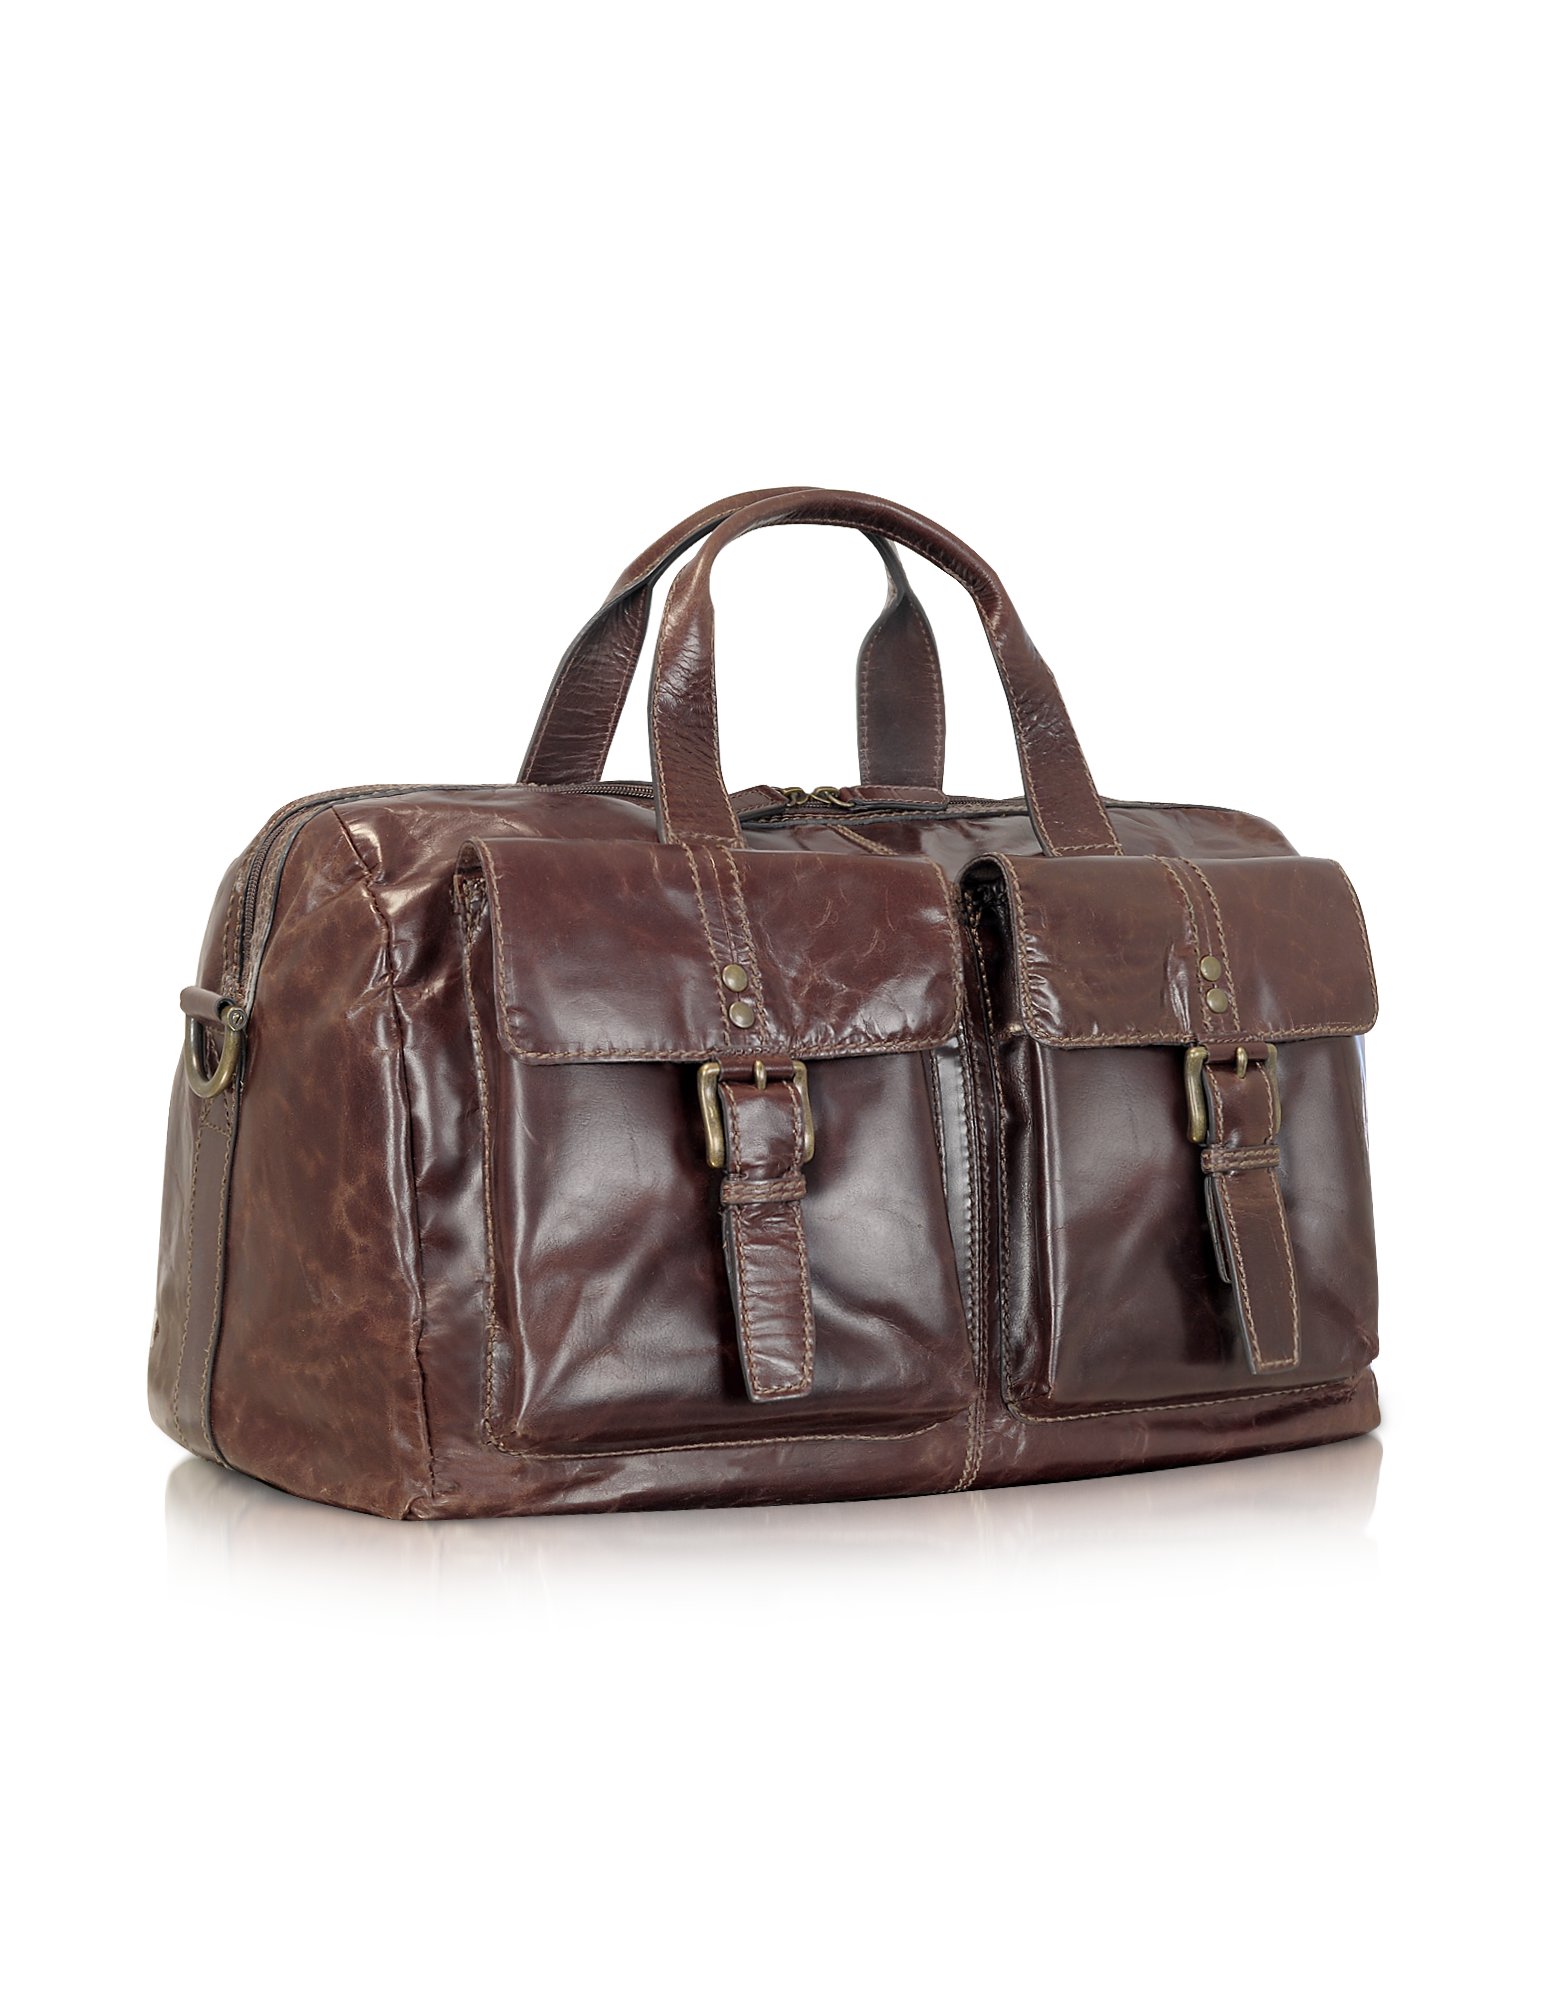 Lyst - Fossil Dayton - Genuine Leather Duffle Bag in Brown for Men